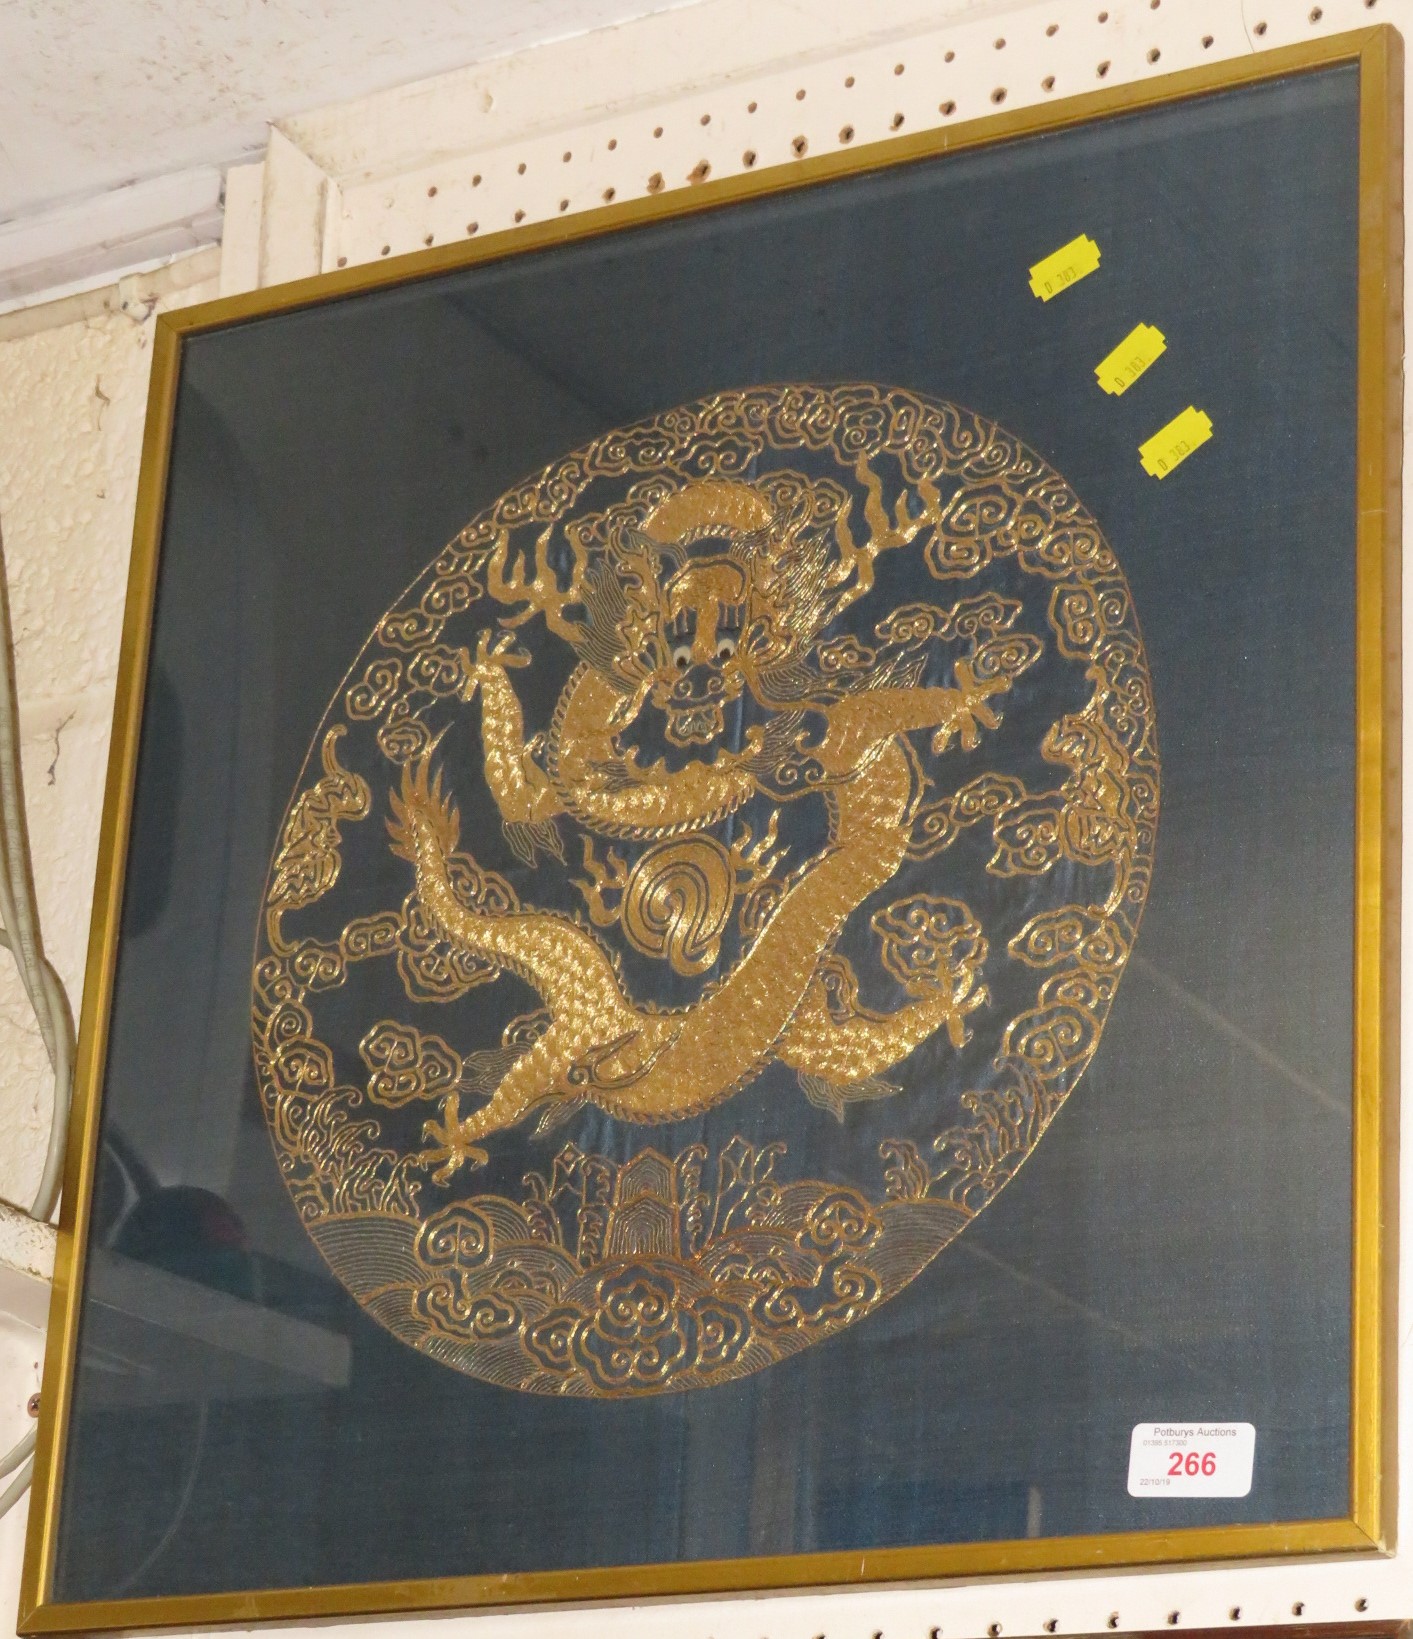 FRAMED AND GLAZED EMBROIDERY IN GOLD COLOURED THREAD DEPICTING CHINESE DRAGON WITH STYLIZED CLOUDS